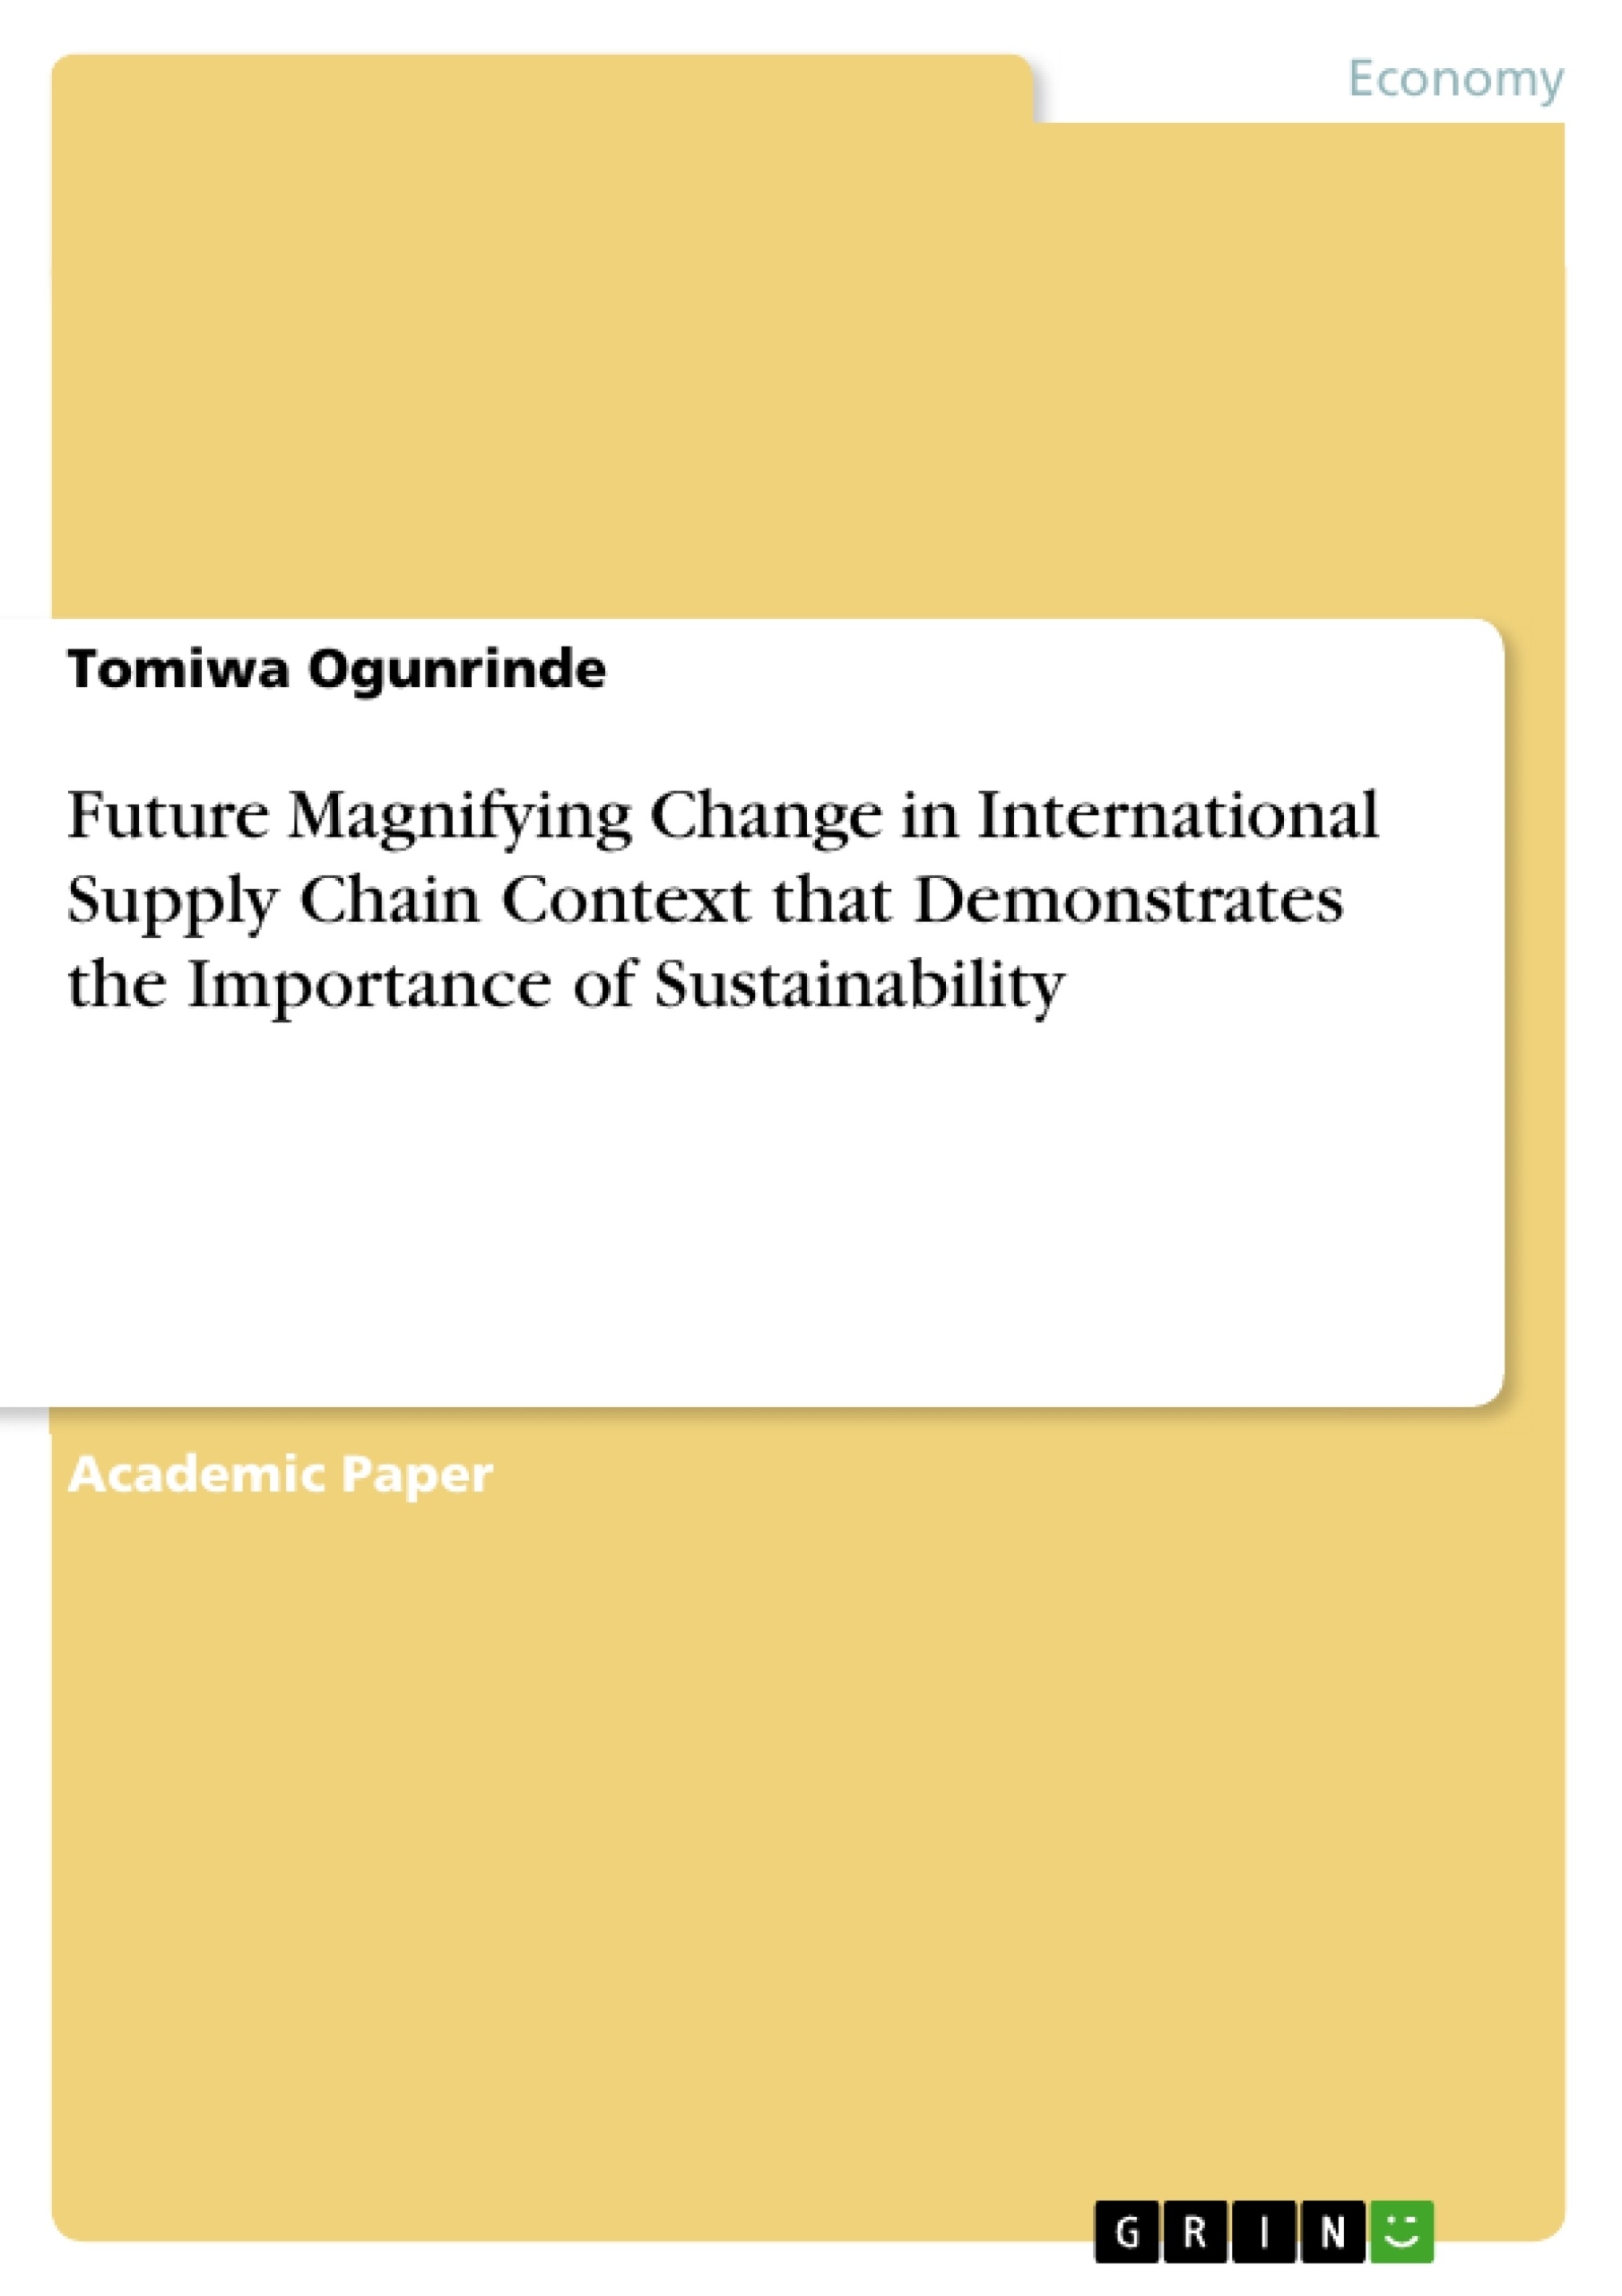 Title: Future Magnifying Change in International Supply Chain Context that Demonstrates the Importance of Sustainability